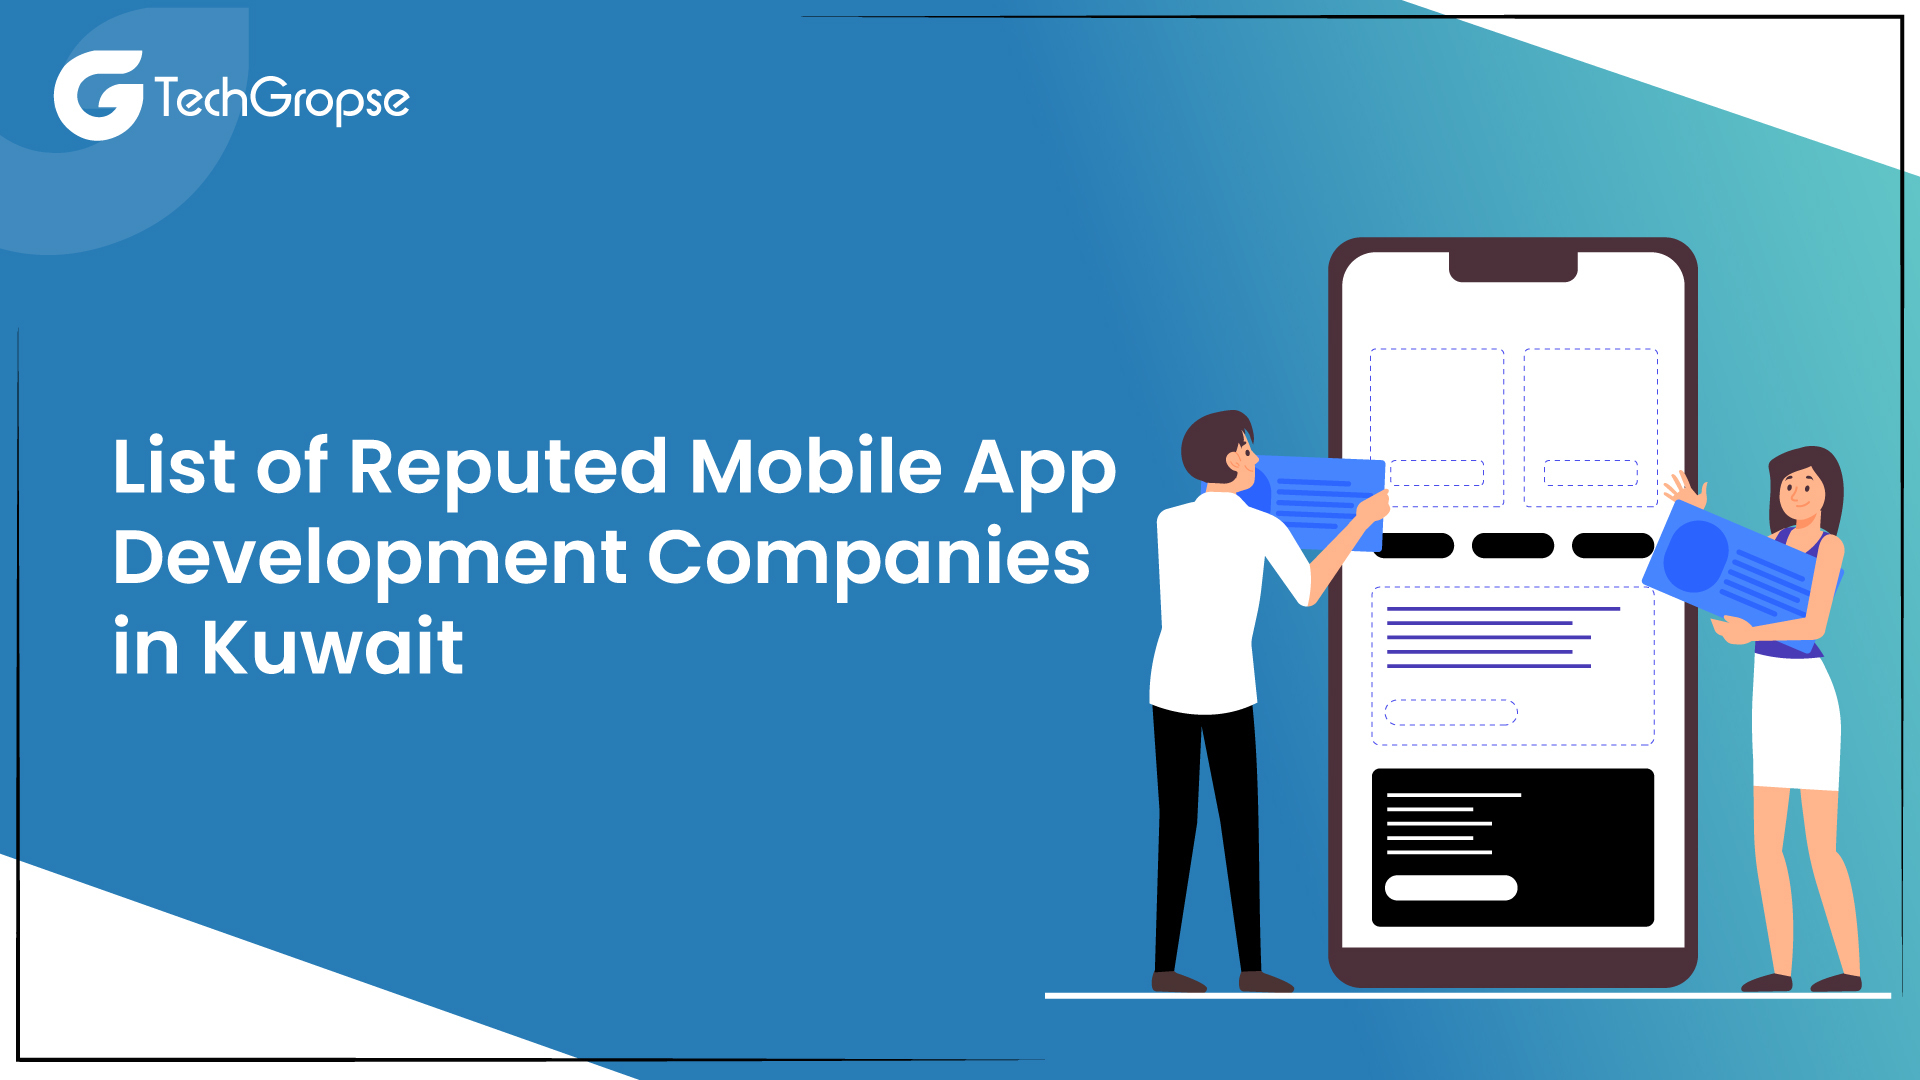 List of Reputed Mobile App Development Companies in Kuwait